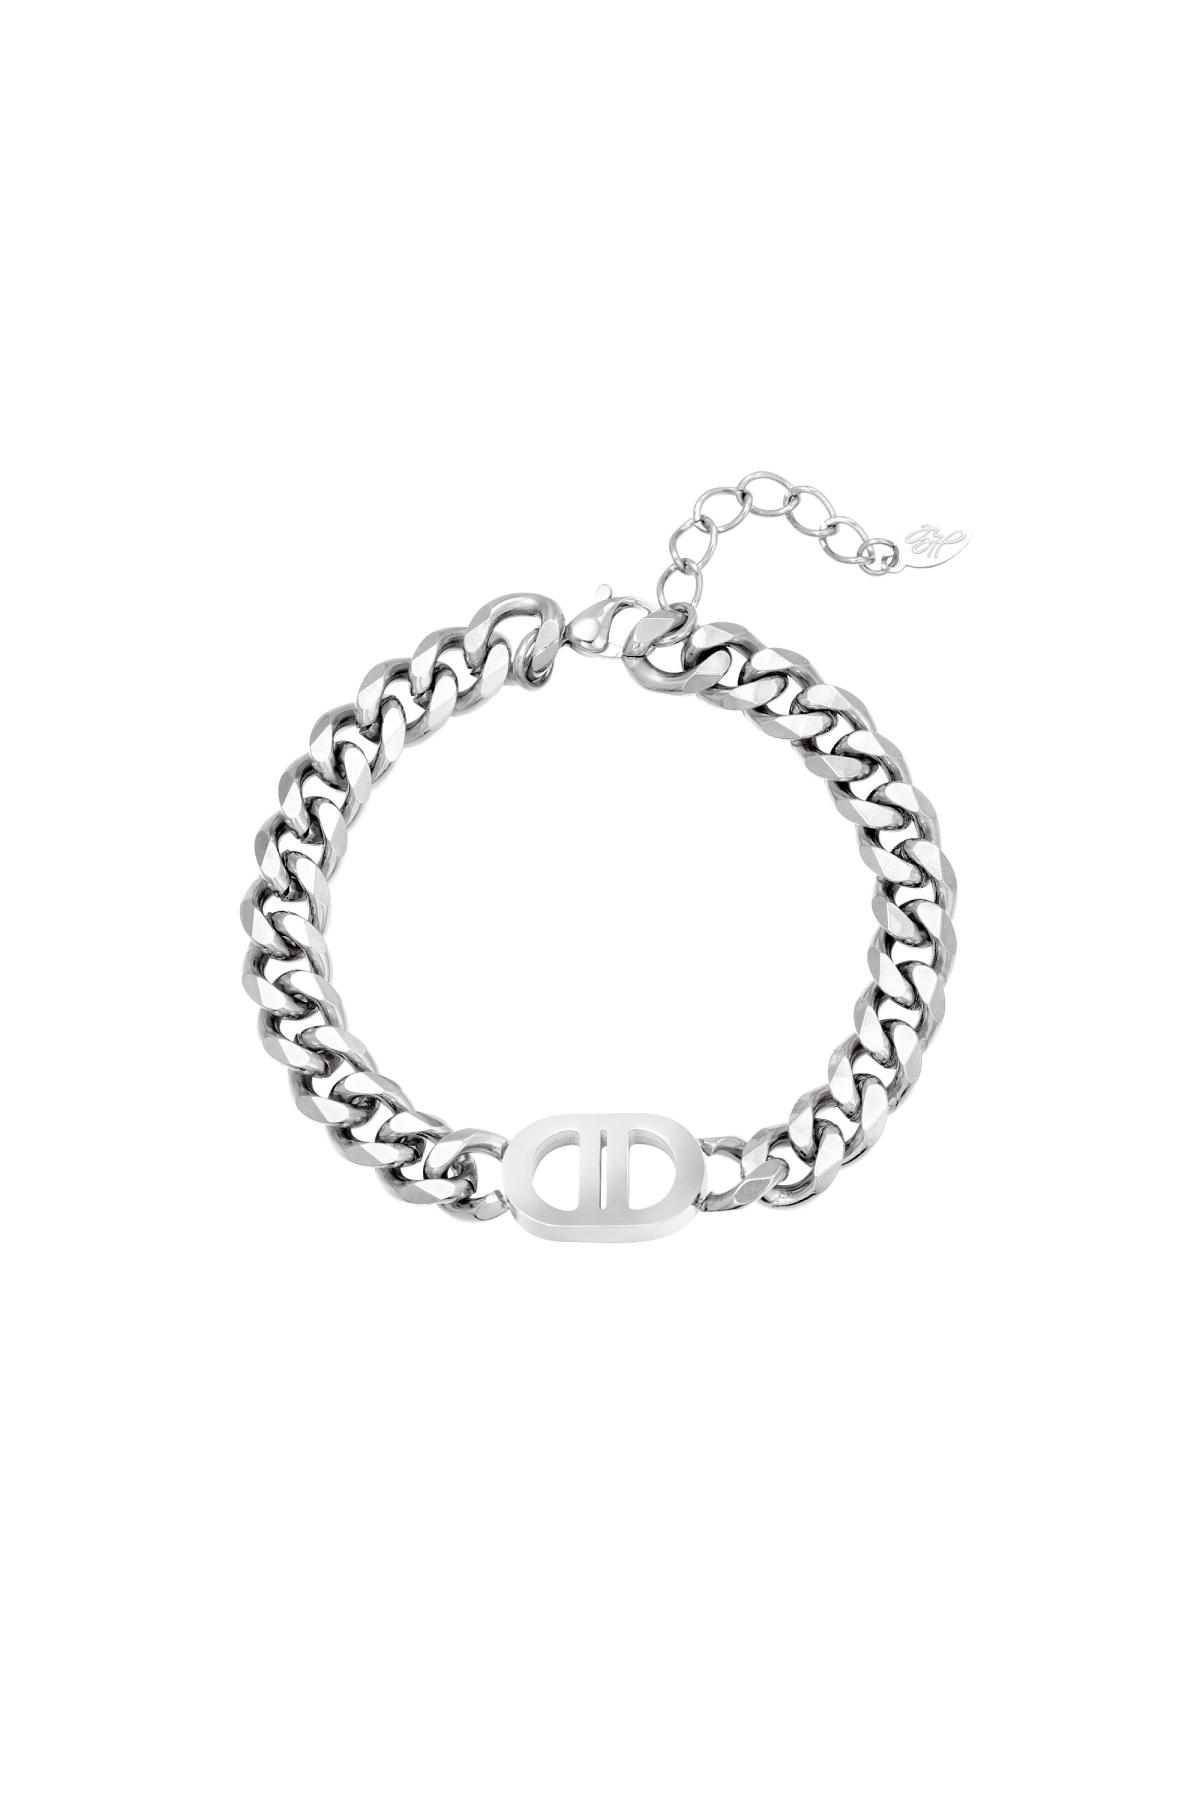 Bracelet The Good Life Silver Stainless Steel 